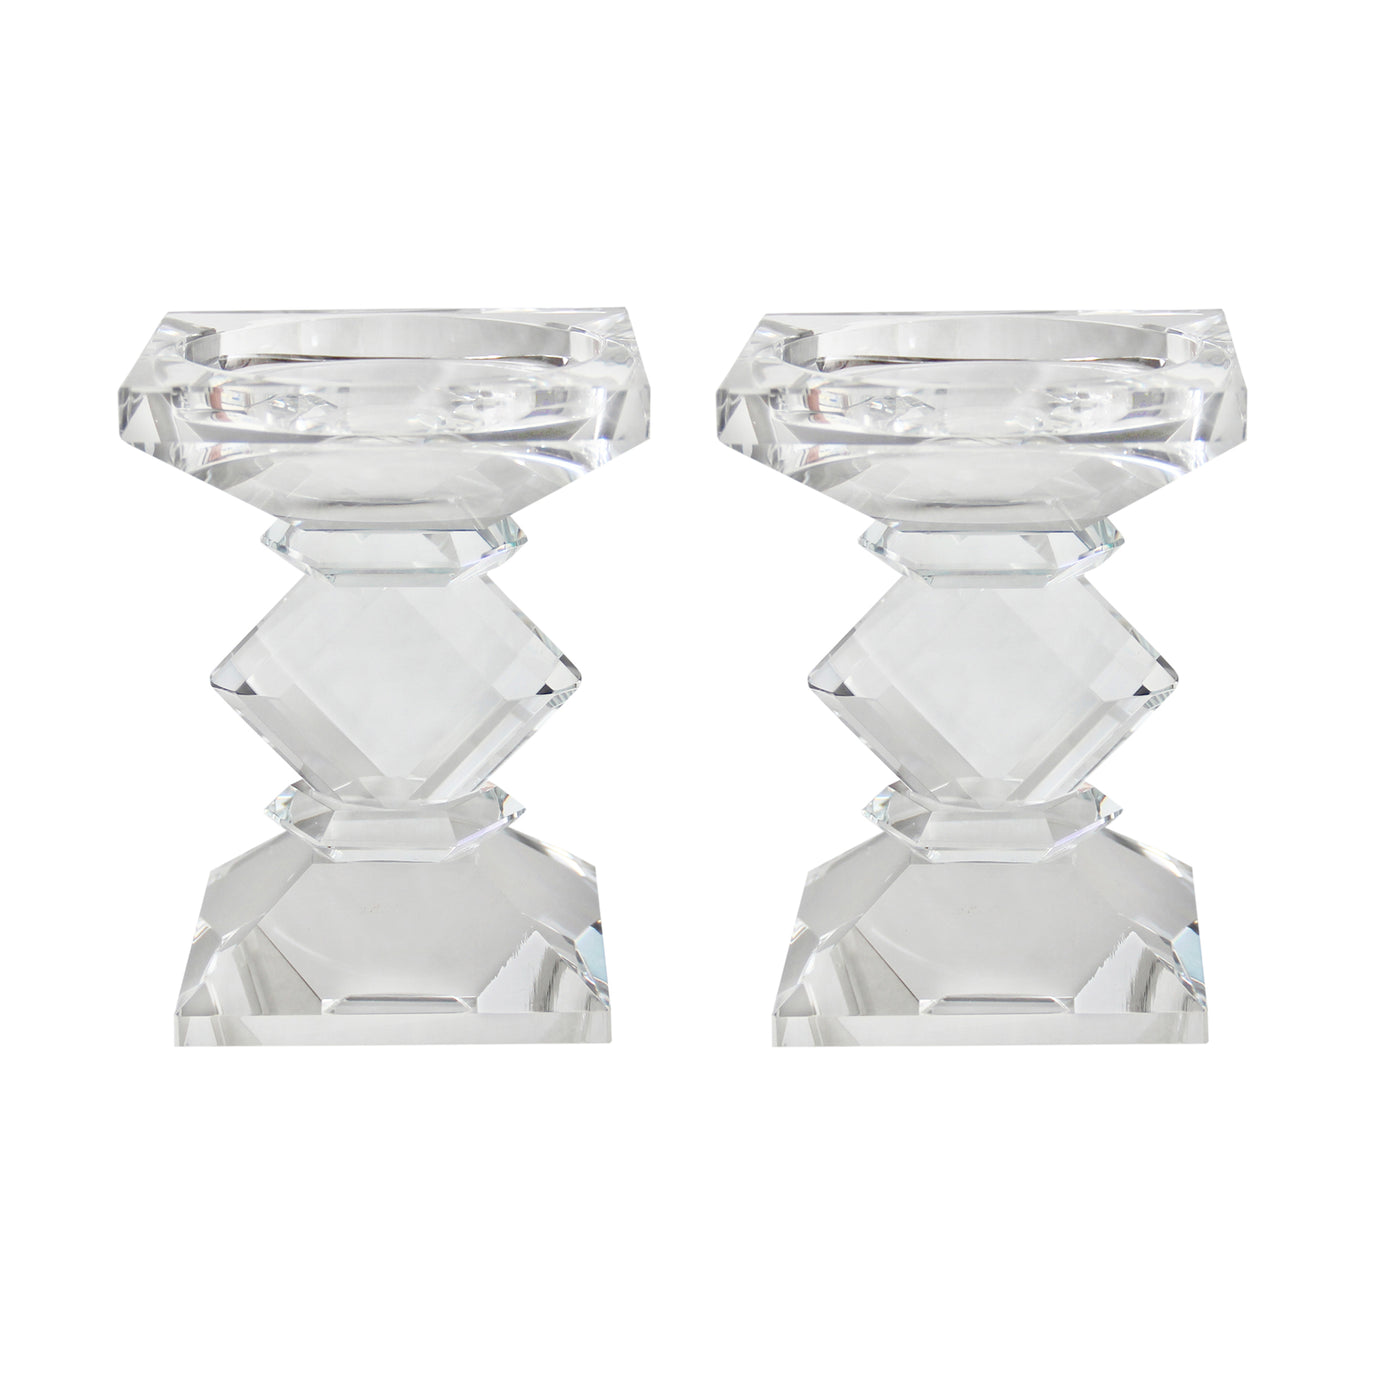 high-end crystal glass candlestick holders